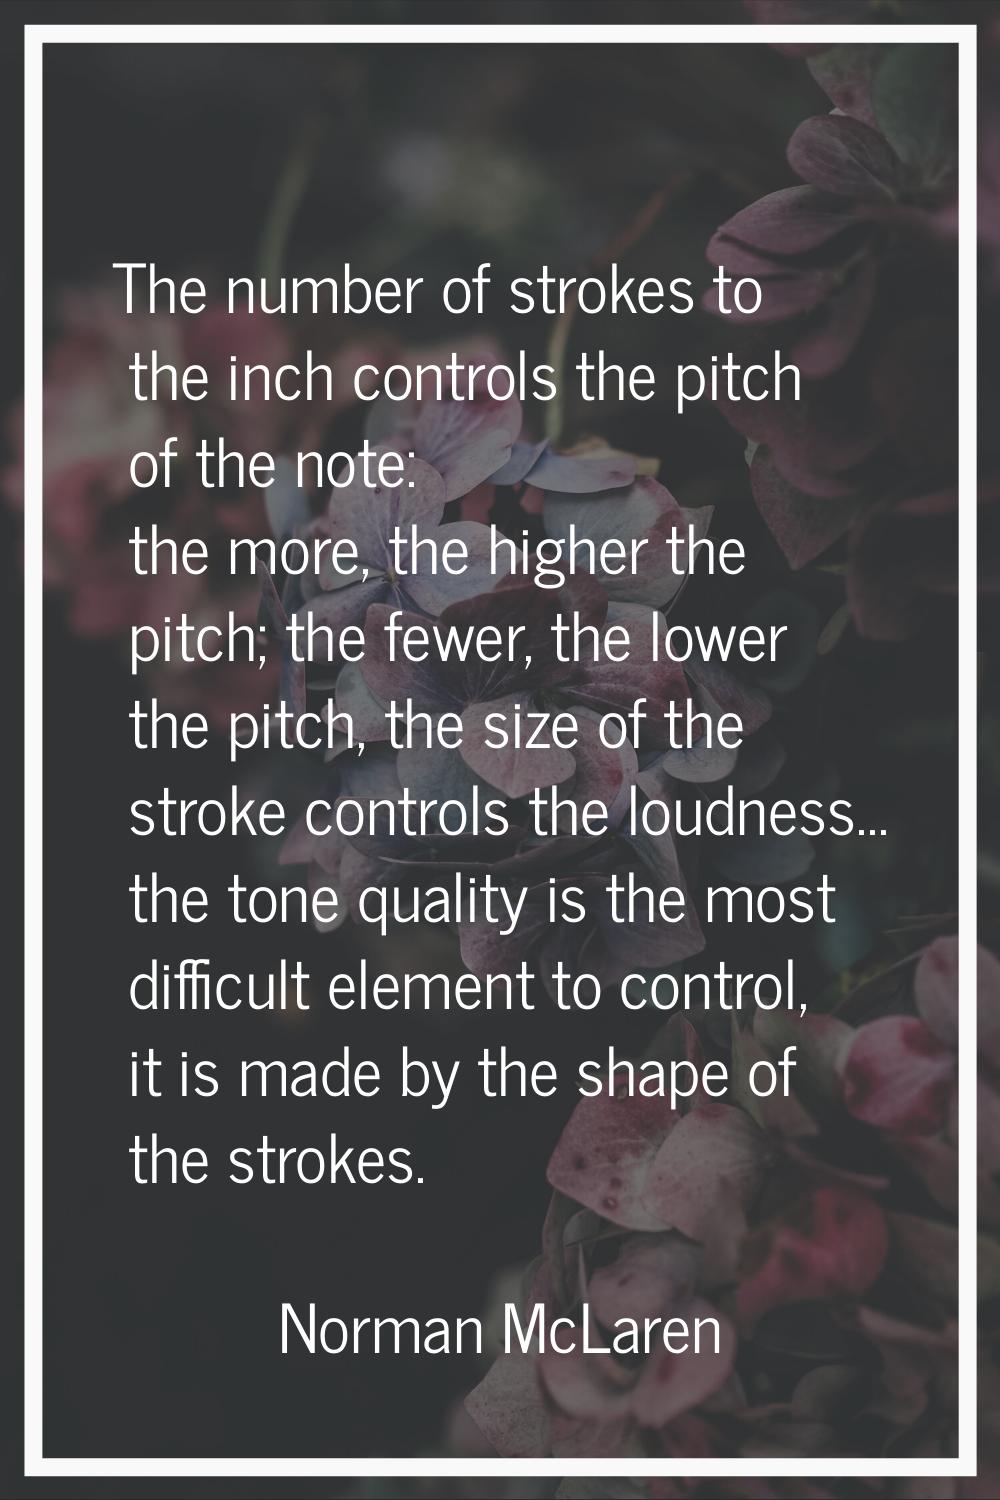 The number of strokes to the inch controls the pitch of the note: the more, the higher the pitch; t